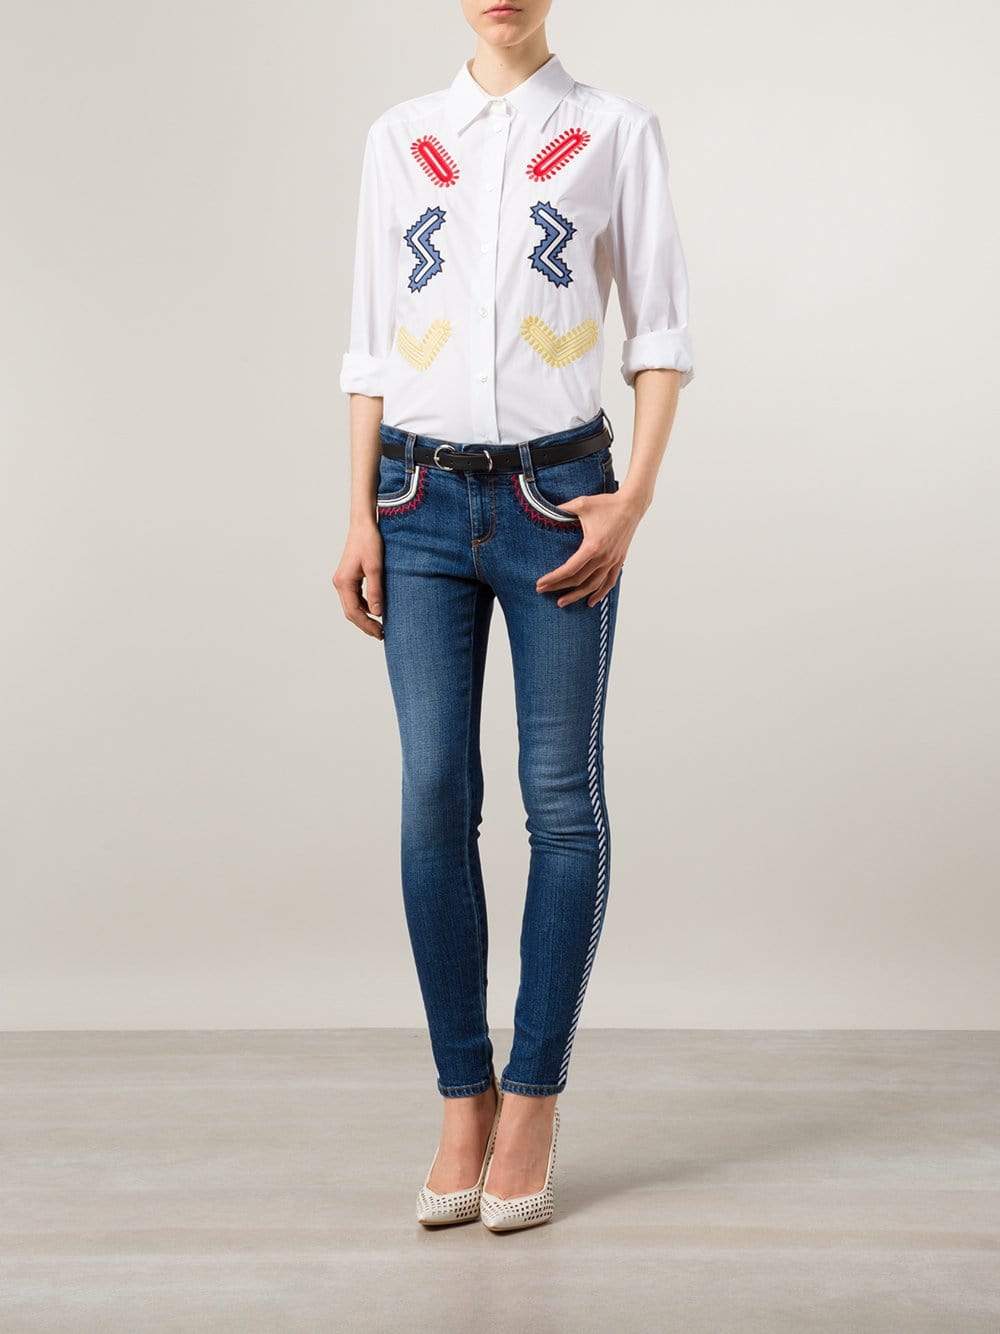 STELLA MCCARTNEY-Embroidered Blouse-